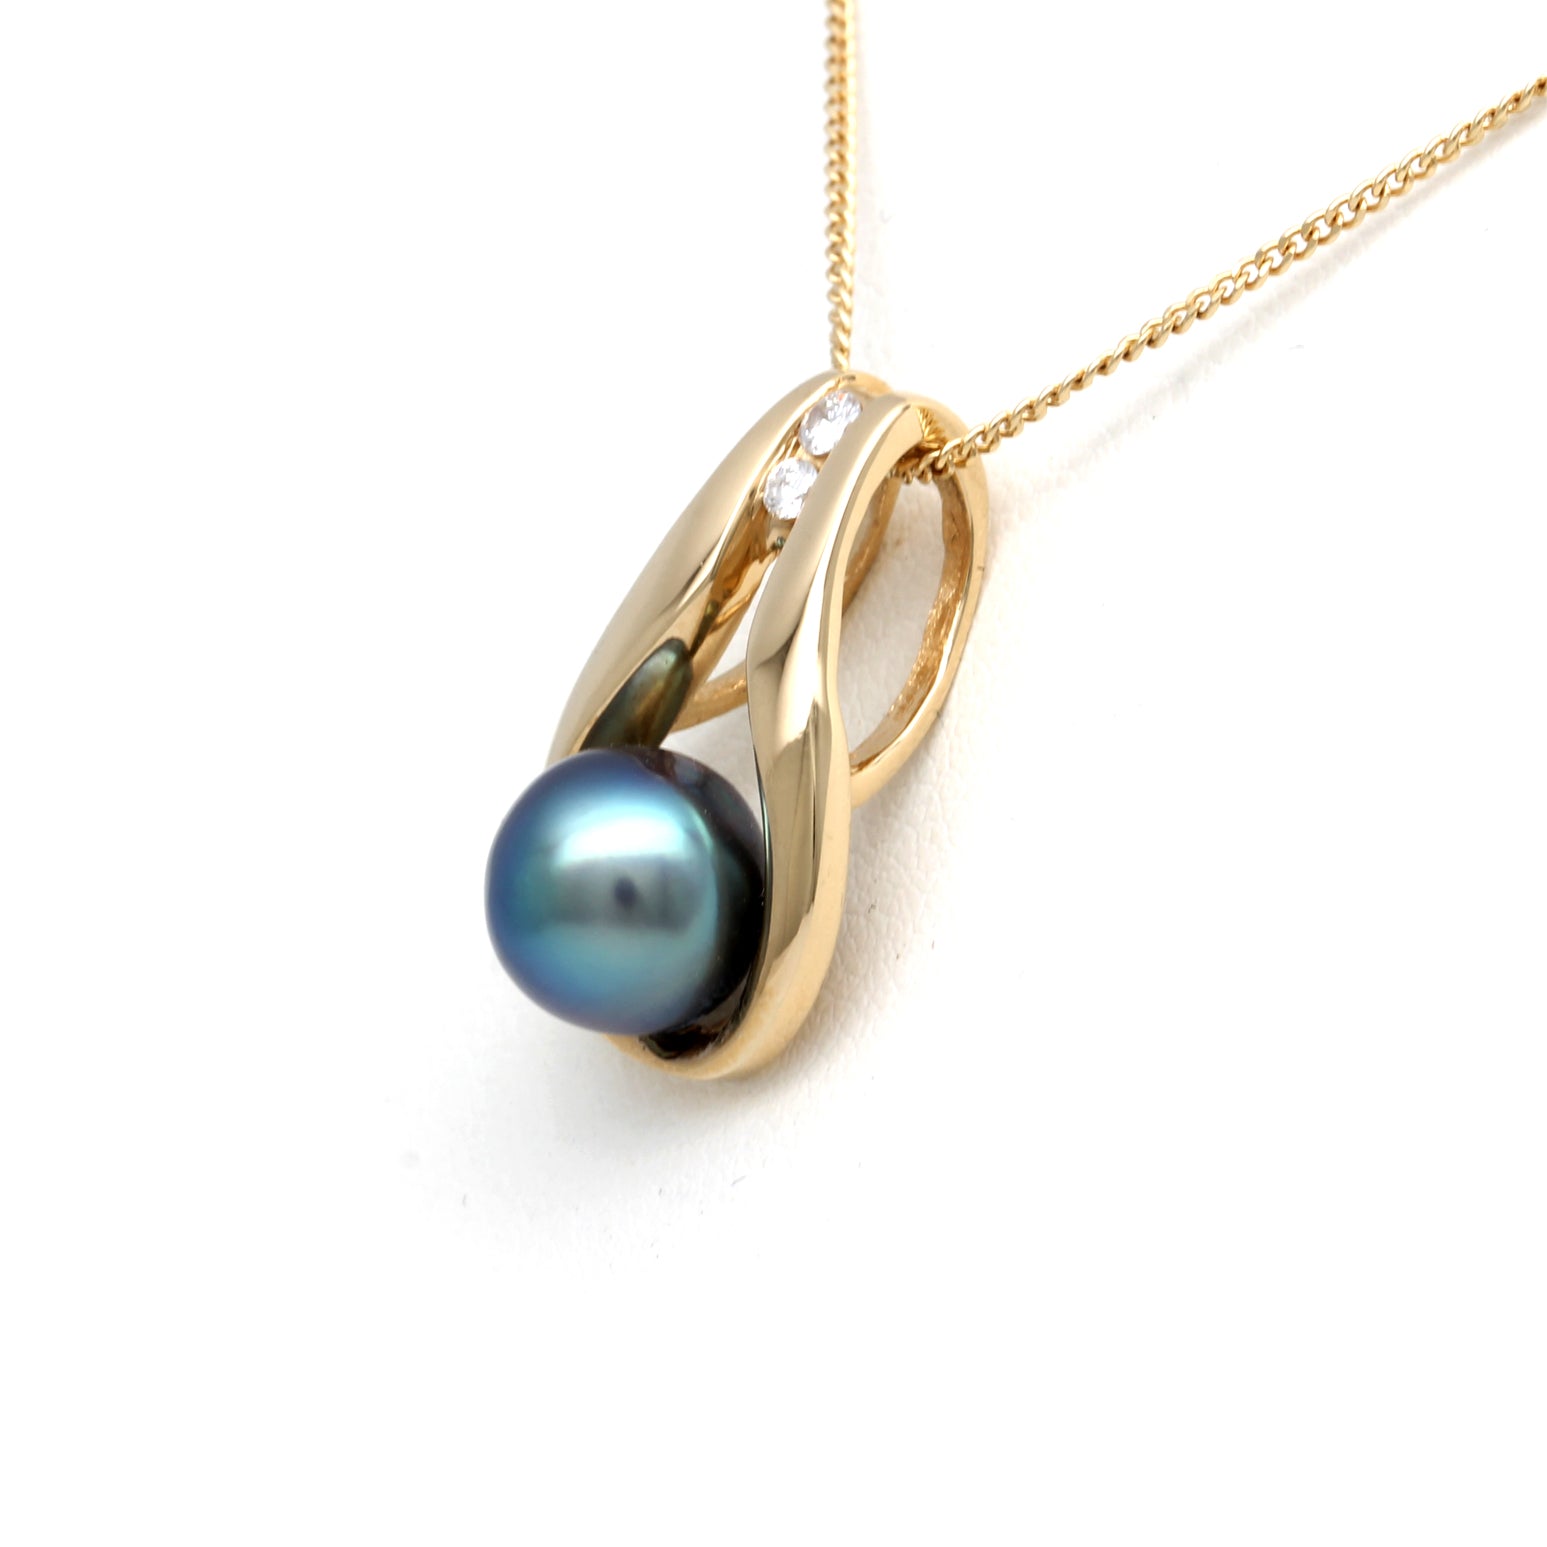 Electric blue Cortez Pearl on 18K Yellow Gold Pendant with Diamonds by Kathe Mai